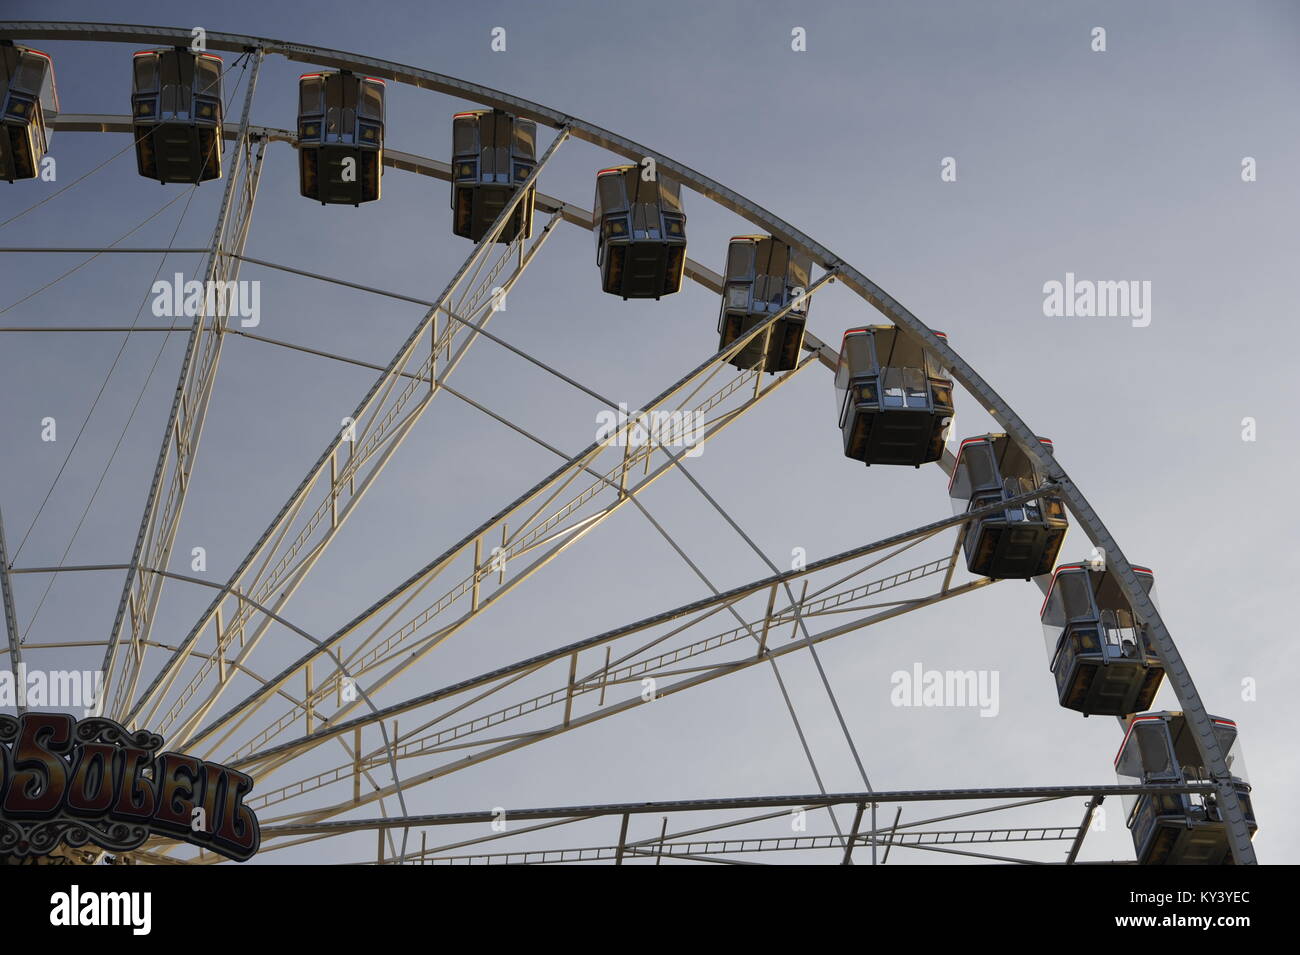 Lahr, Germany. November 1, 2017. You could  go with a Ferris wheel and look at the terrain from above. © Ulrich Höfer / Alamy Live News Stock Photo